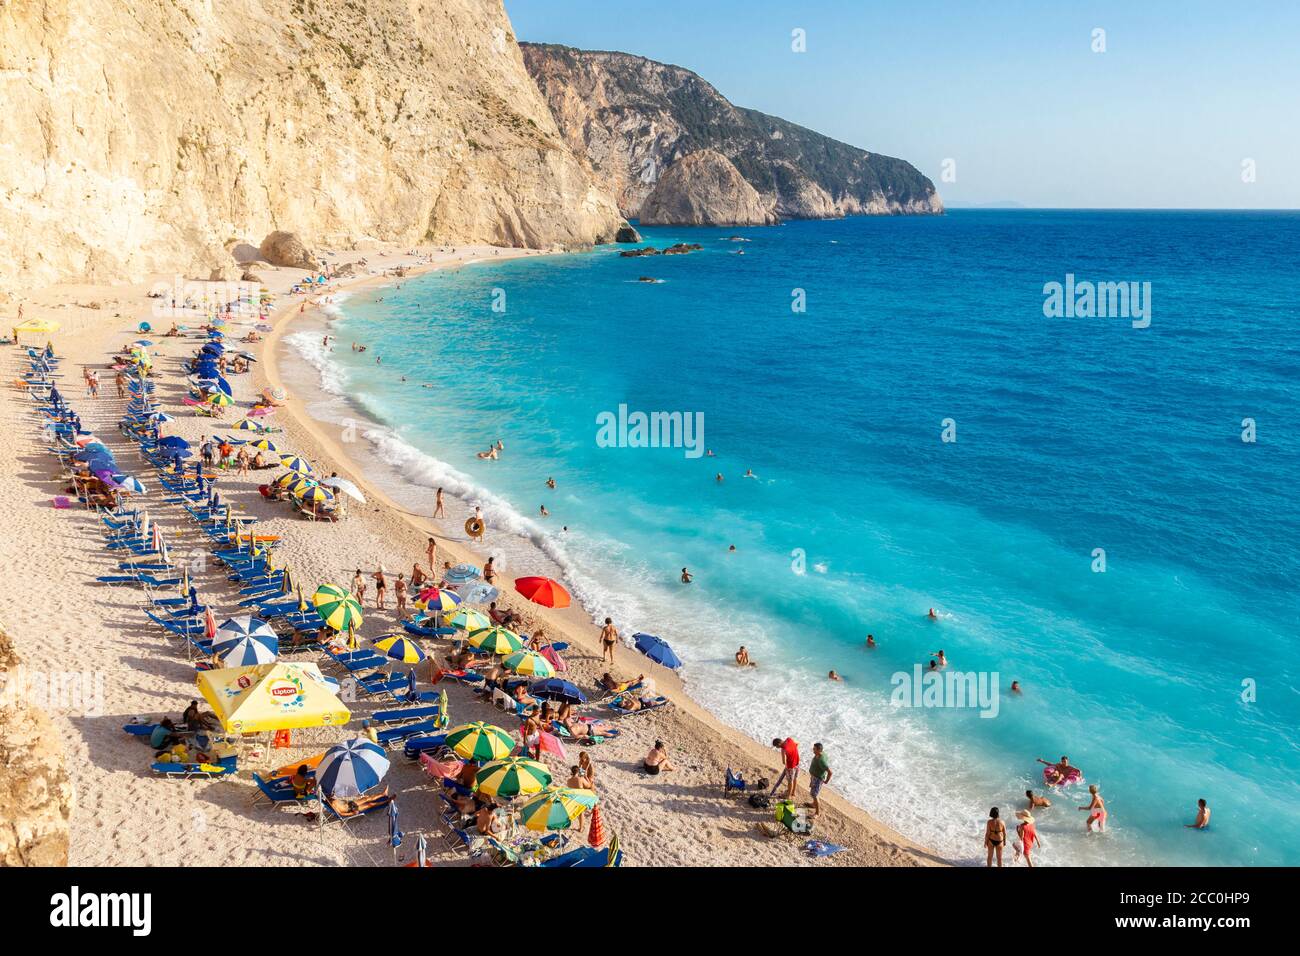 View of people swimming and relaxing at Porto Katsiki beach, Lefkada, Ionian Islands, Greece Stock Photo